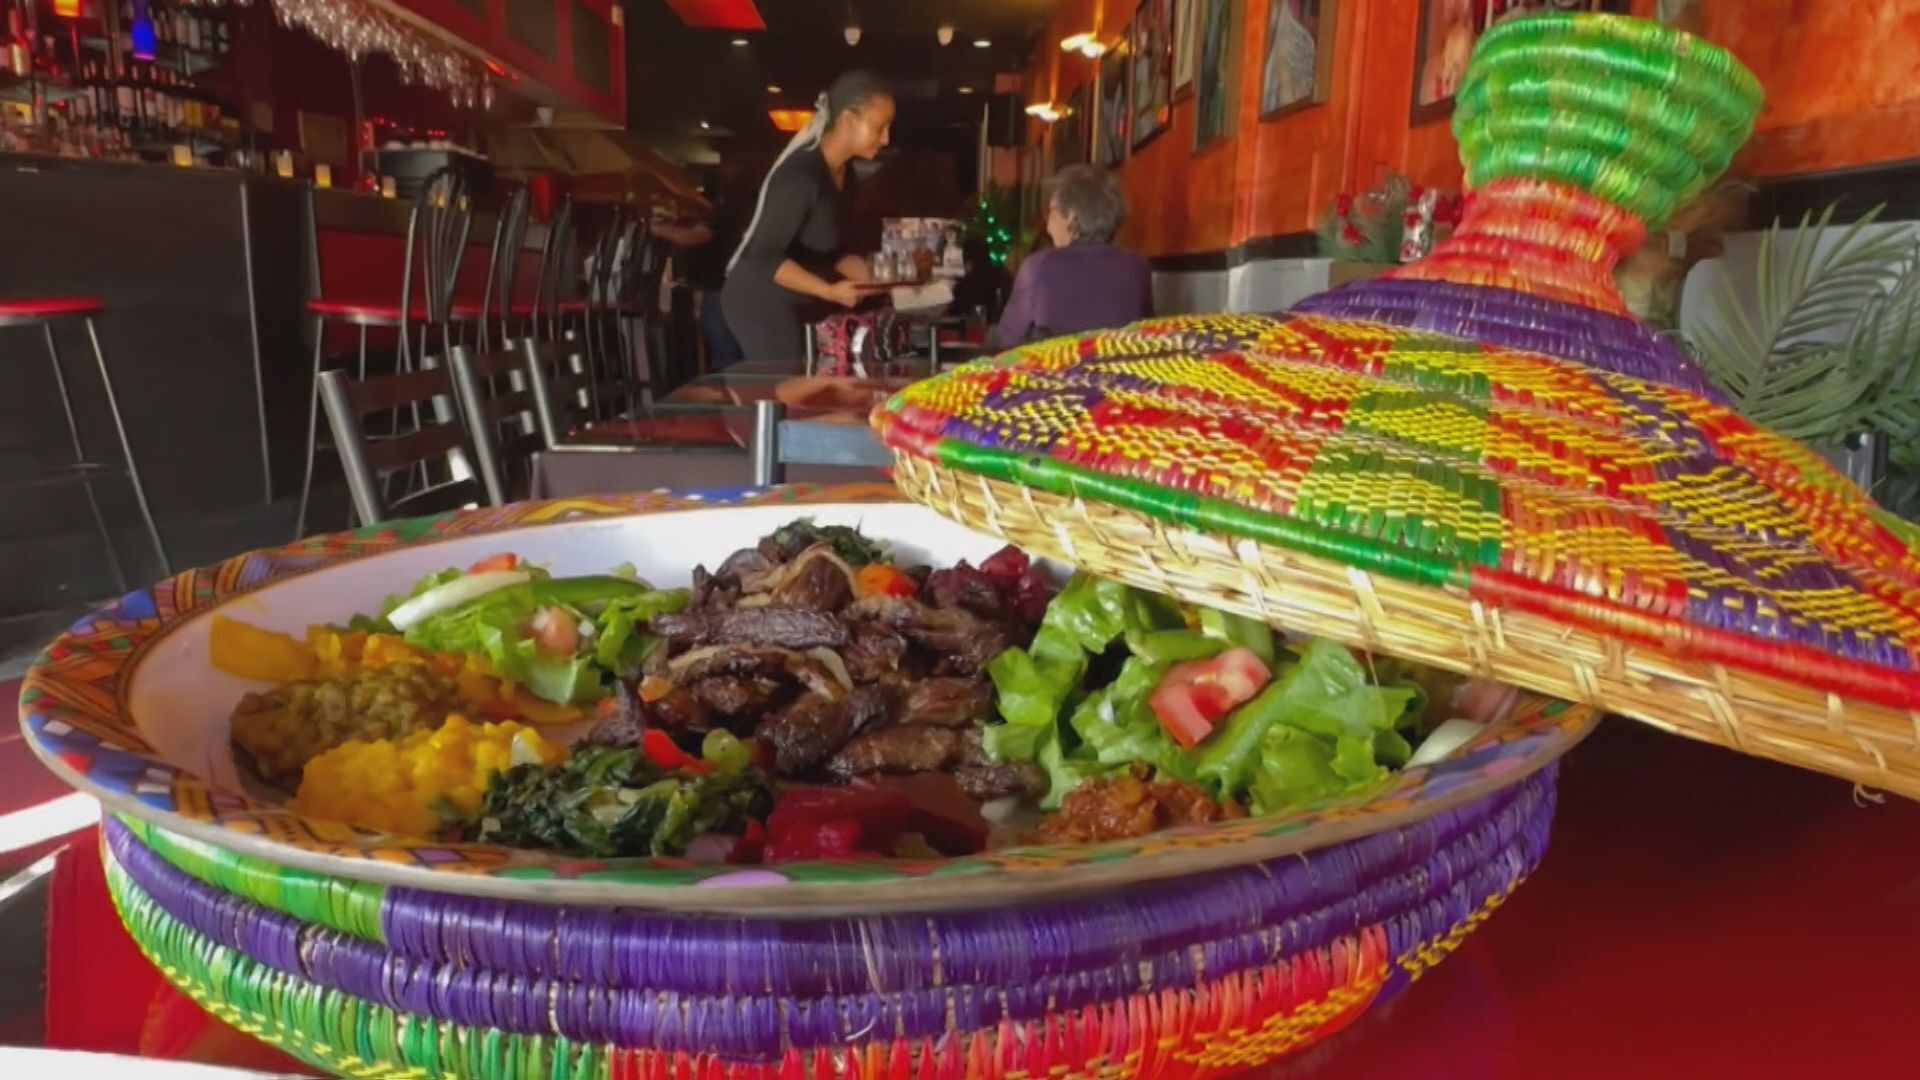 Little Ethiopia continues to thrive on Toronto's Danforth Avenue